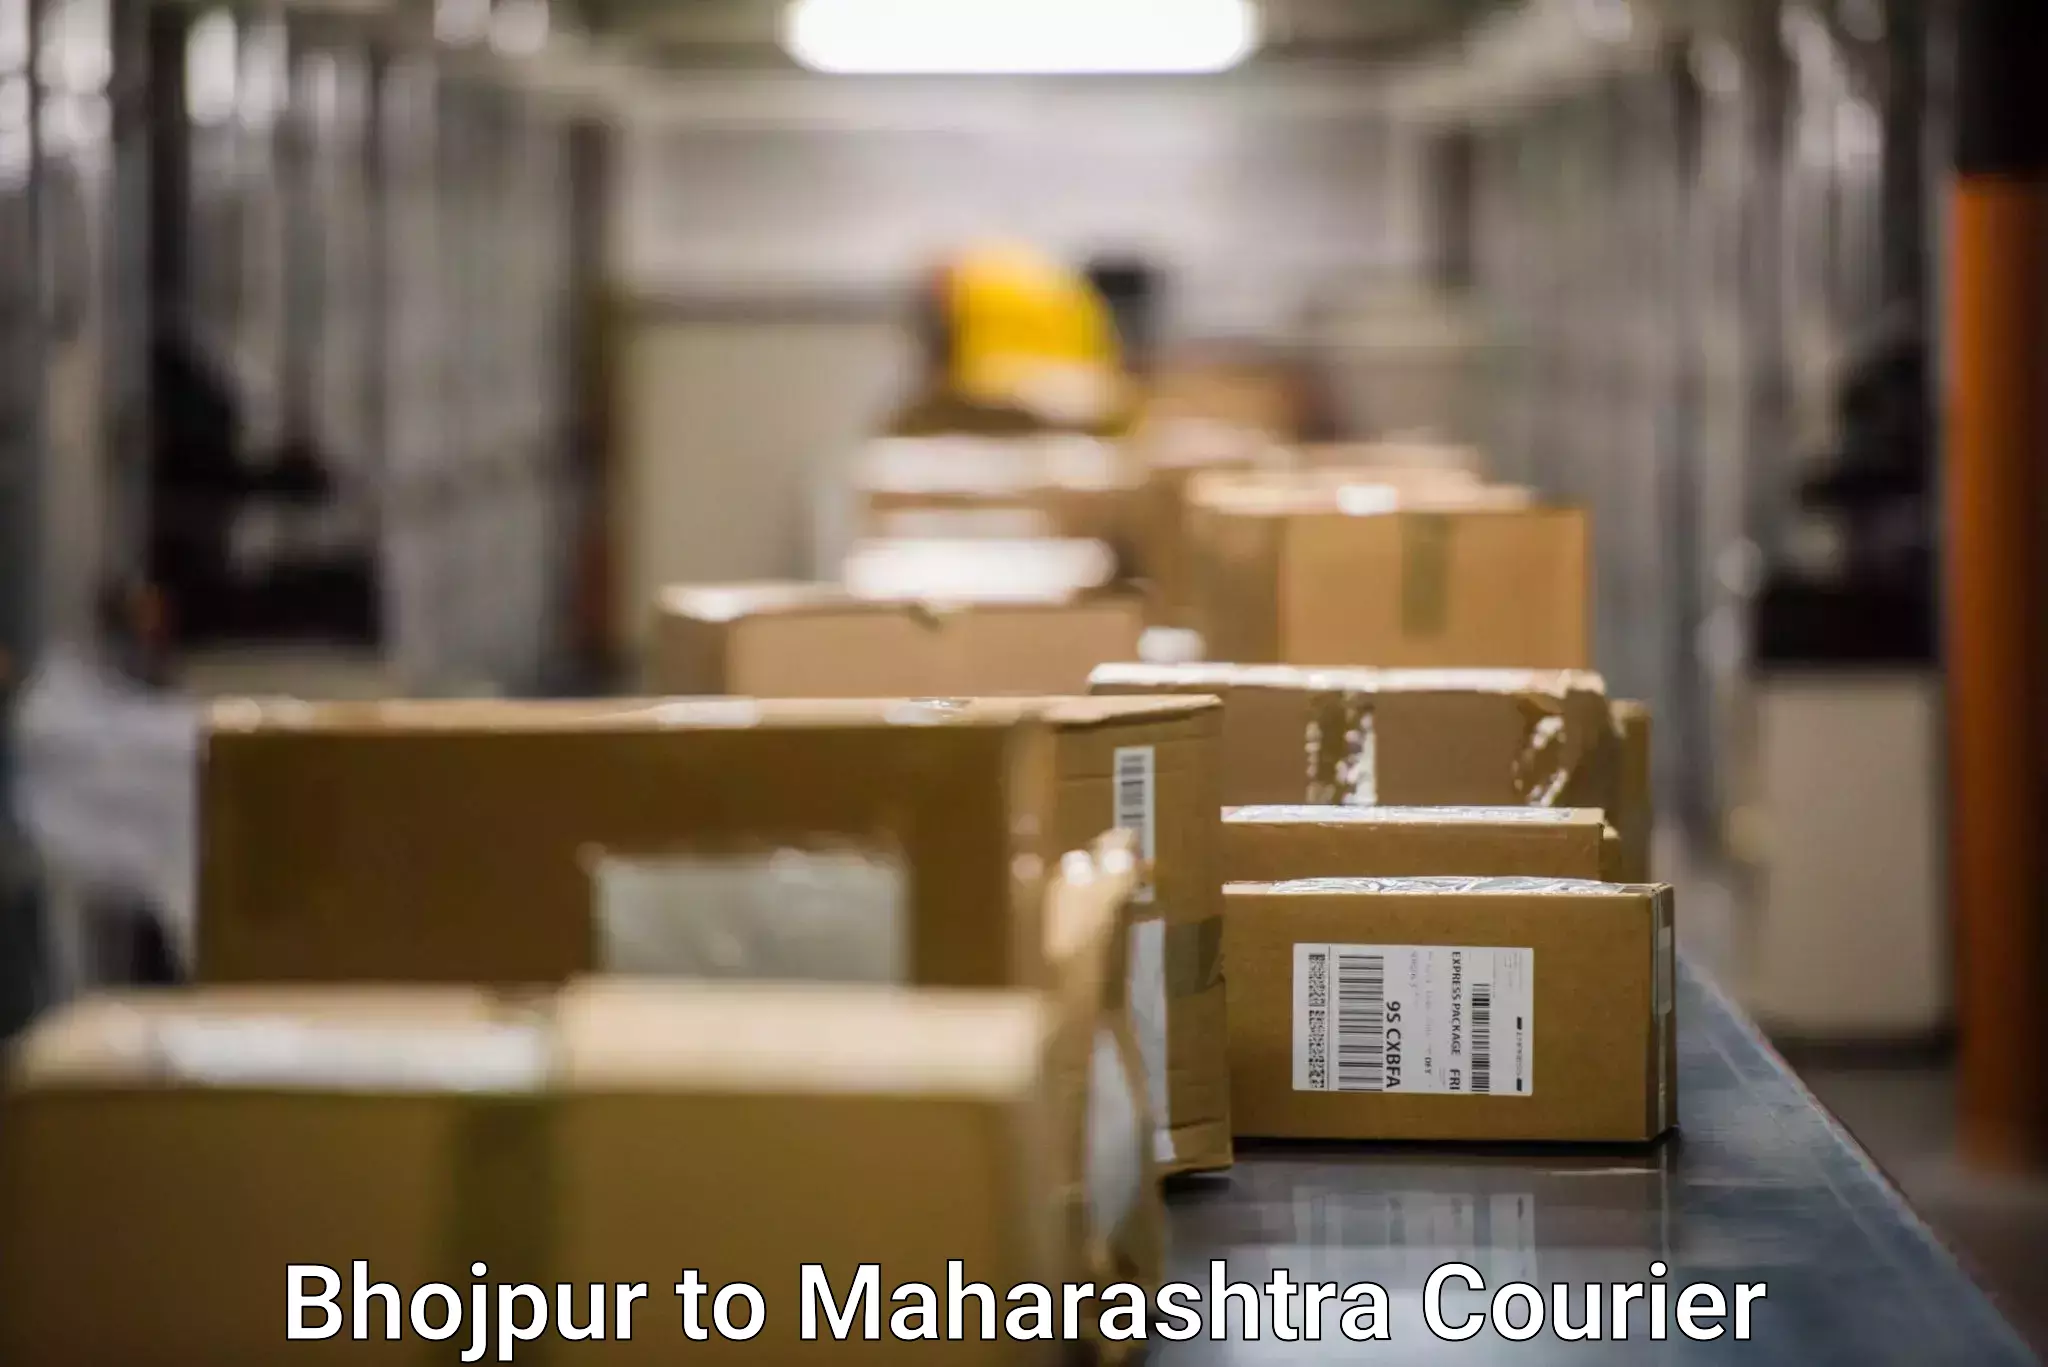 Advanced shipping network Bhojpur to Andheri